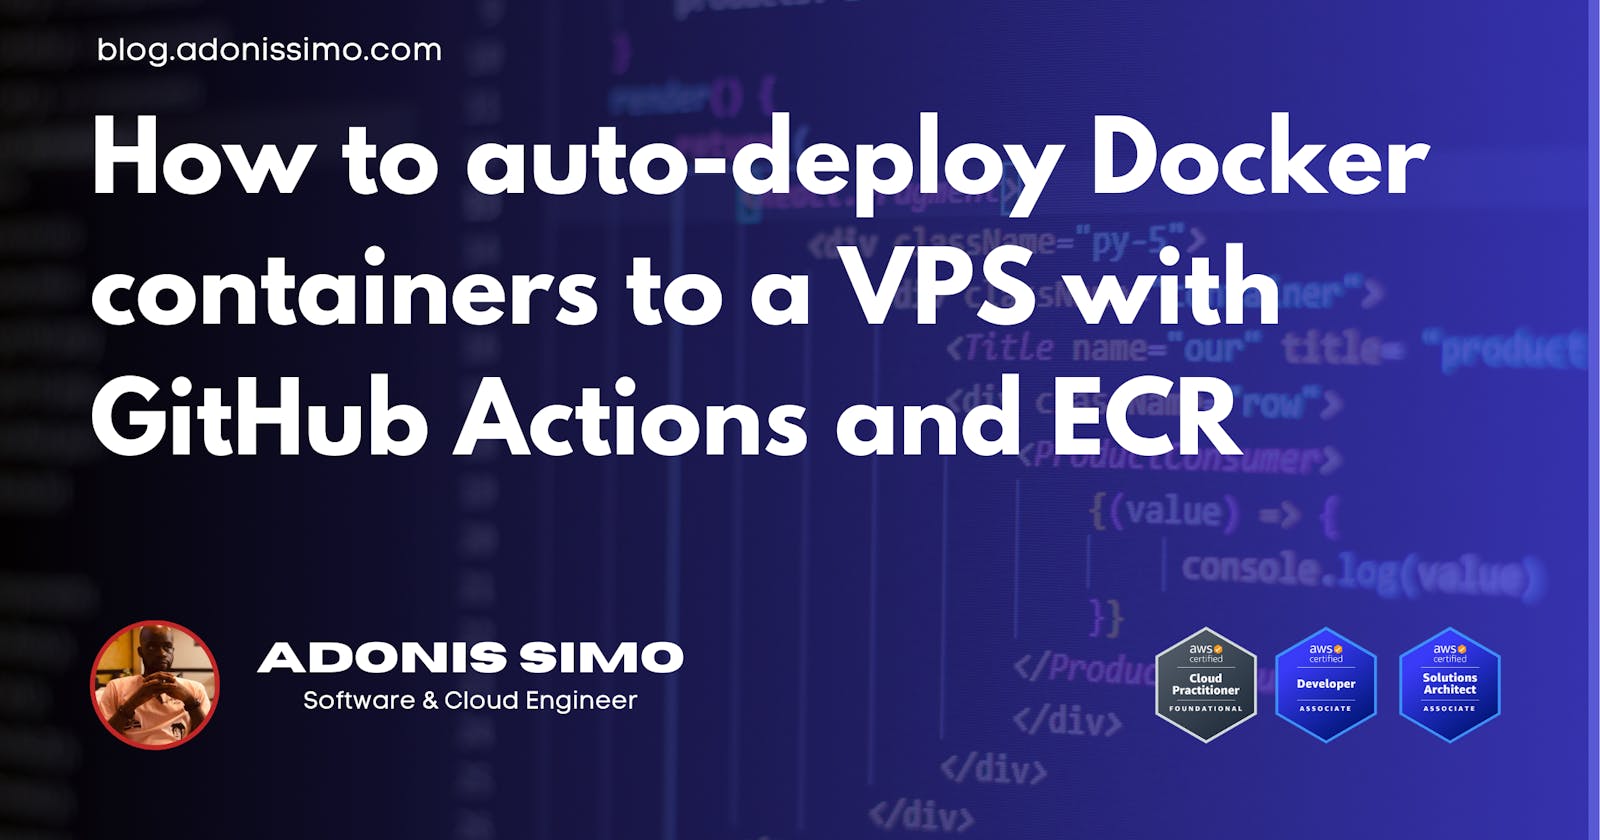 How to deploy a production app on a VPS and automate the process with Docker, GitHub Actions, and AWS ECR.